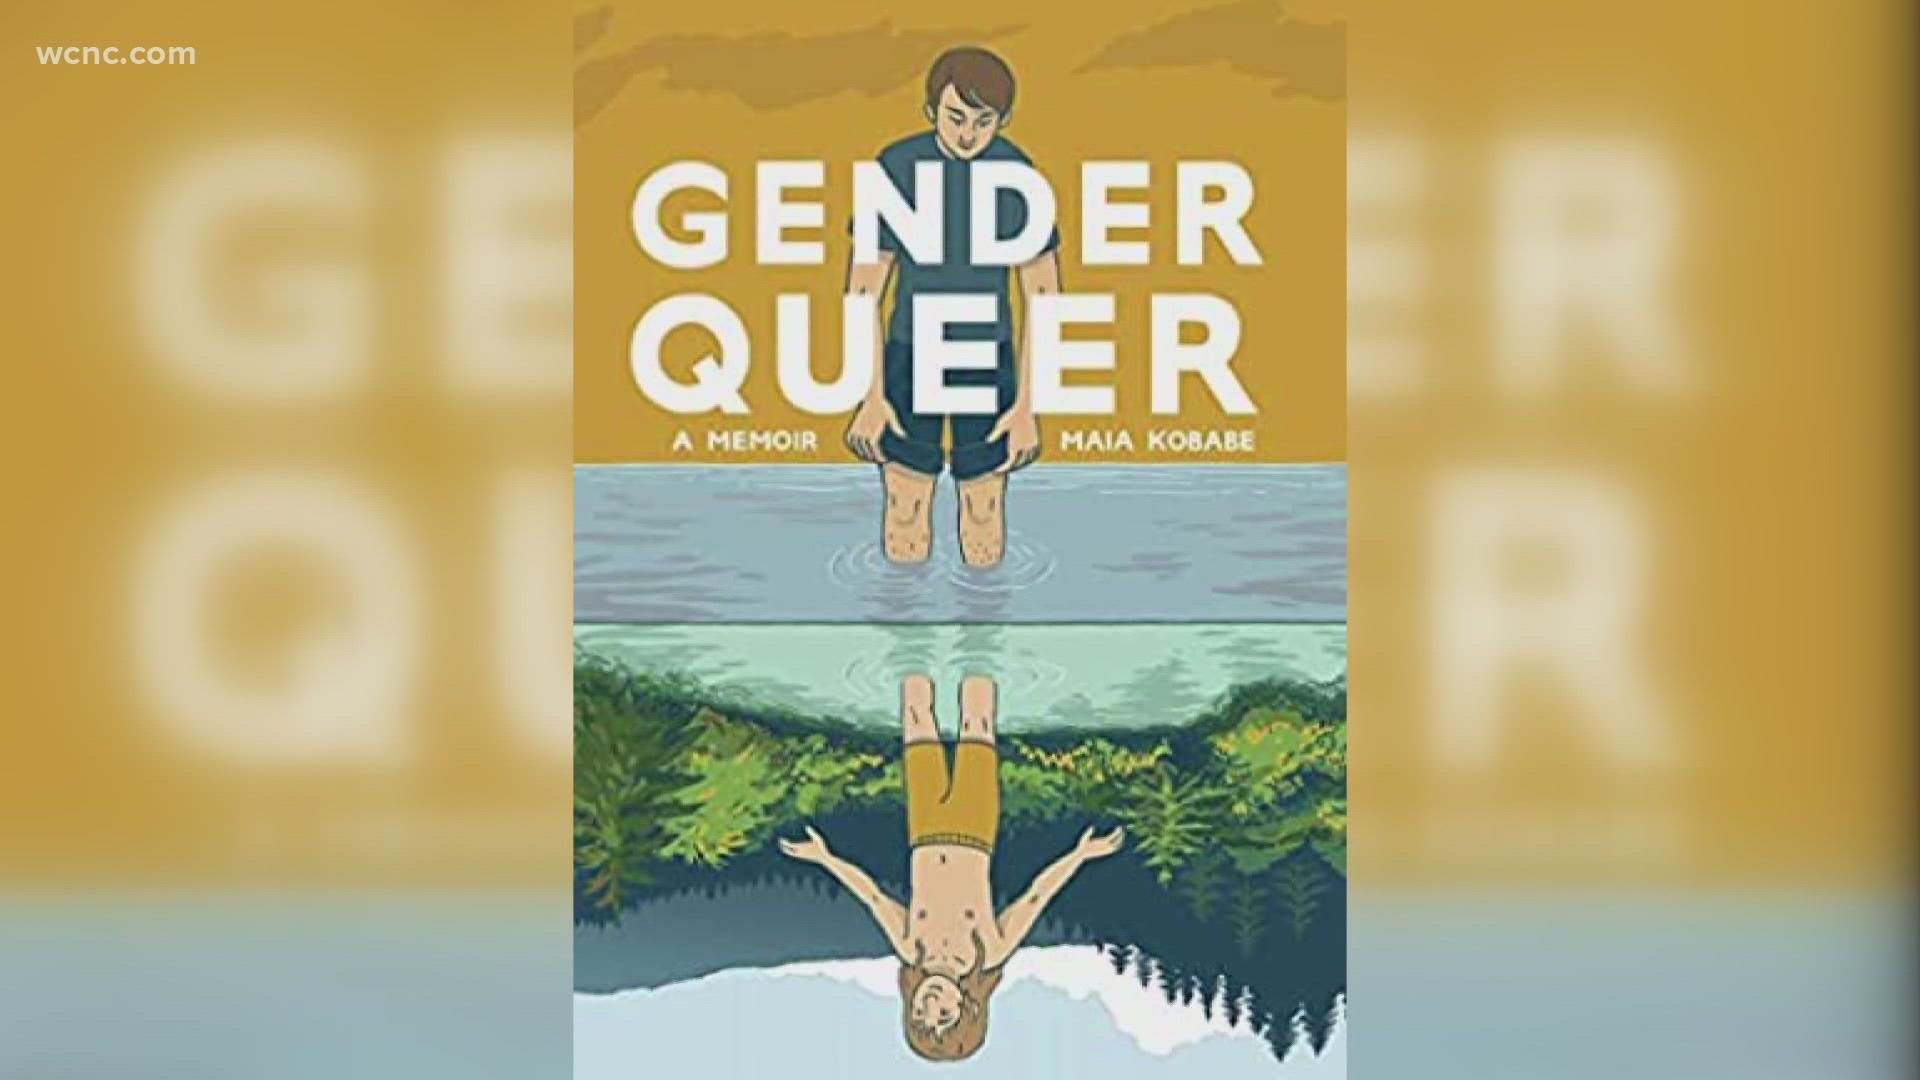 The book, an autobiography presented in comic book form entitled "Gender Queer: A Memoir" details the experiences of author Maia Kobabe, who identifies as nonbinary.